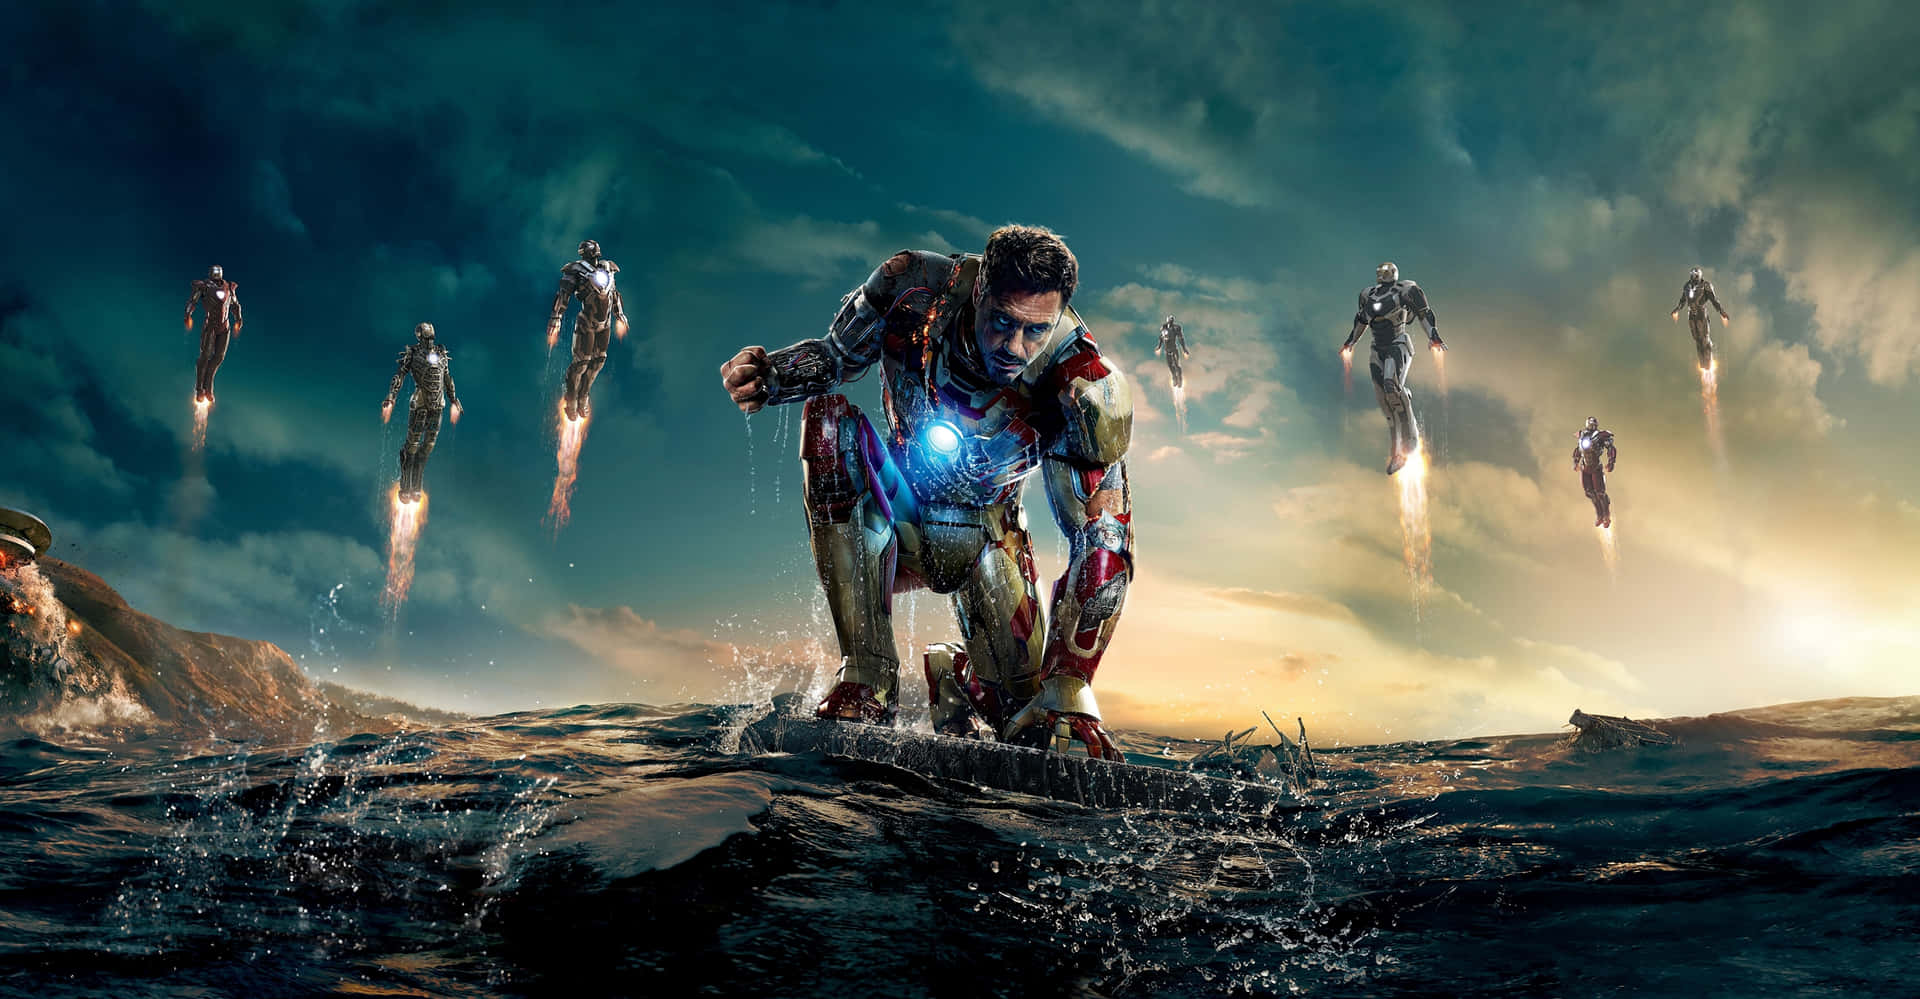 Iron Man gearing up for yet another thrilling mission Wallpaper